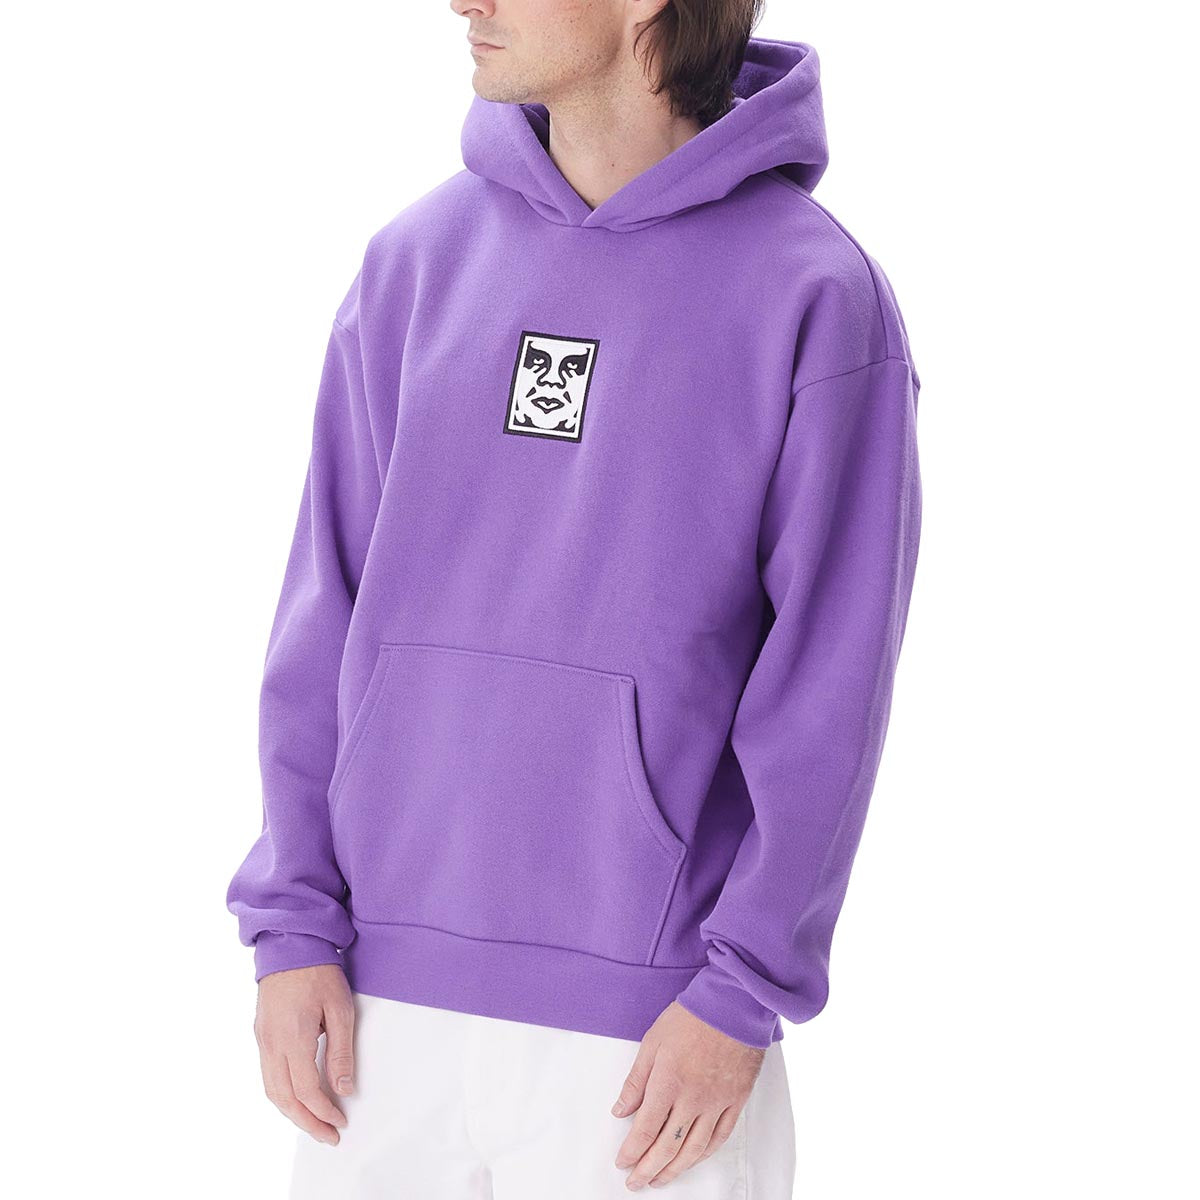 Obey Tbd Hoodie - Passion Flower image 3